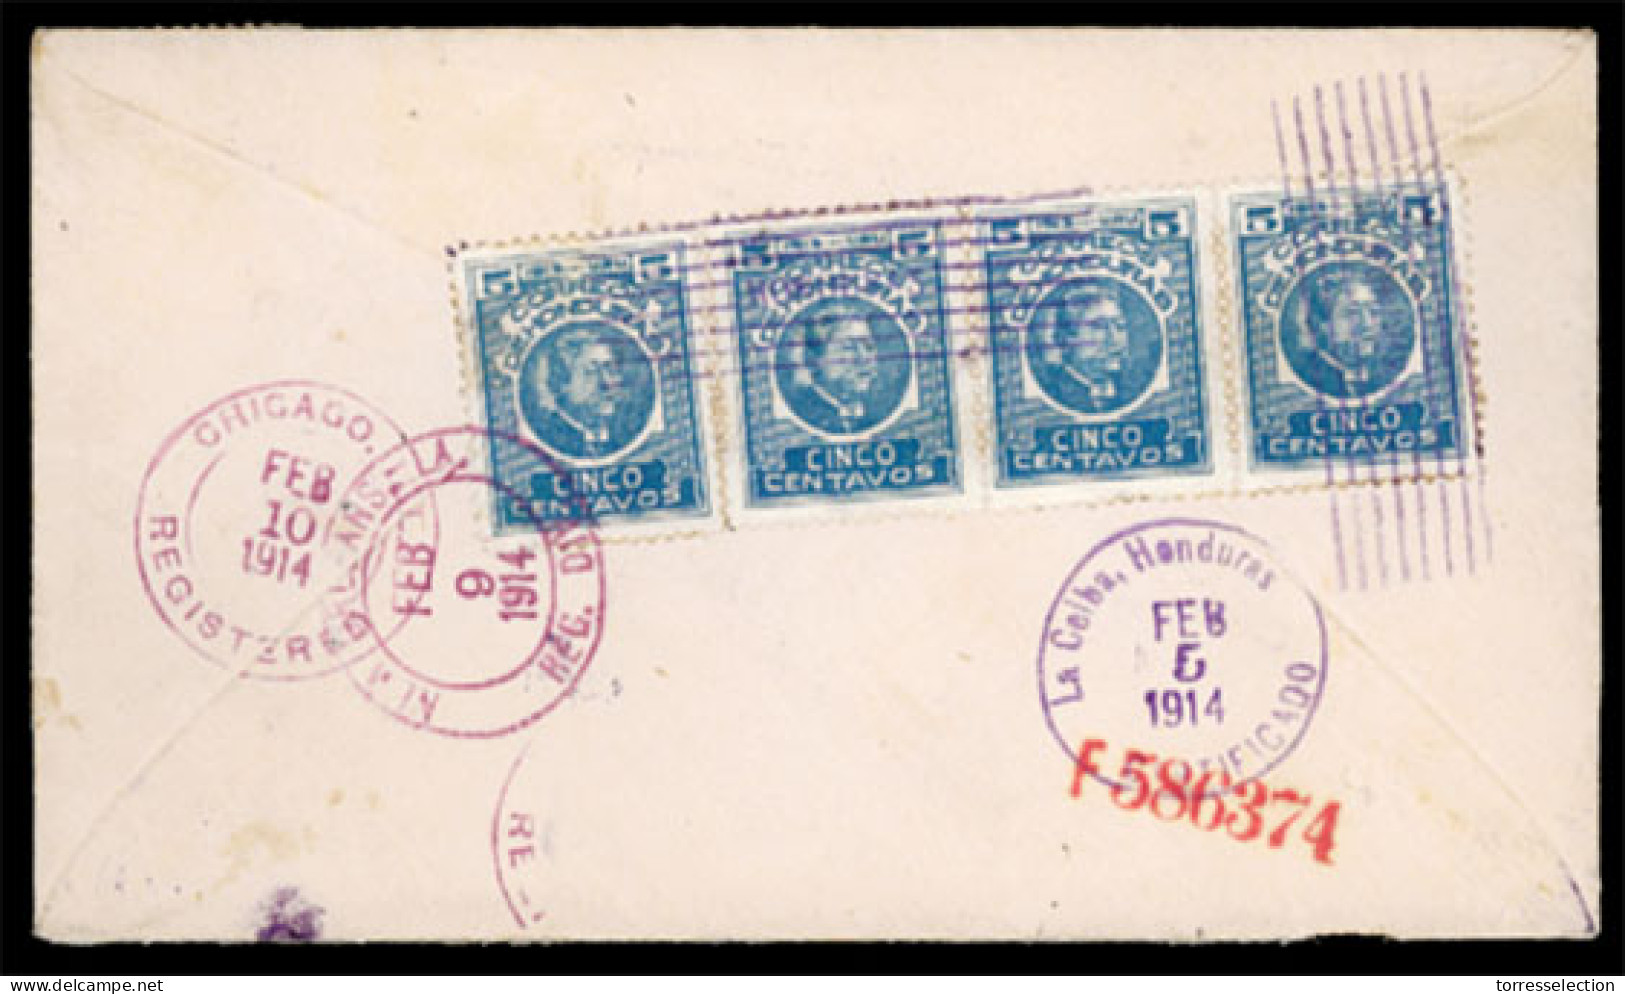 HONDURAS. 1914 (4 Feb). Registered Cover To Chicago From La Ciba Franked By Two Singles And Strip Of Three 1913 5c Blue  - Honduras